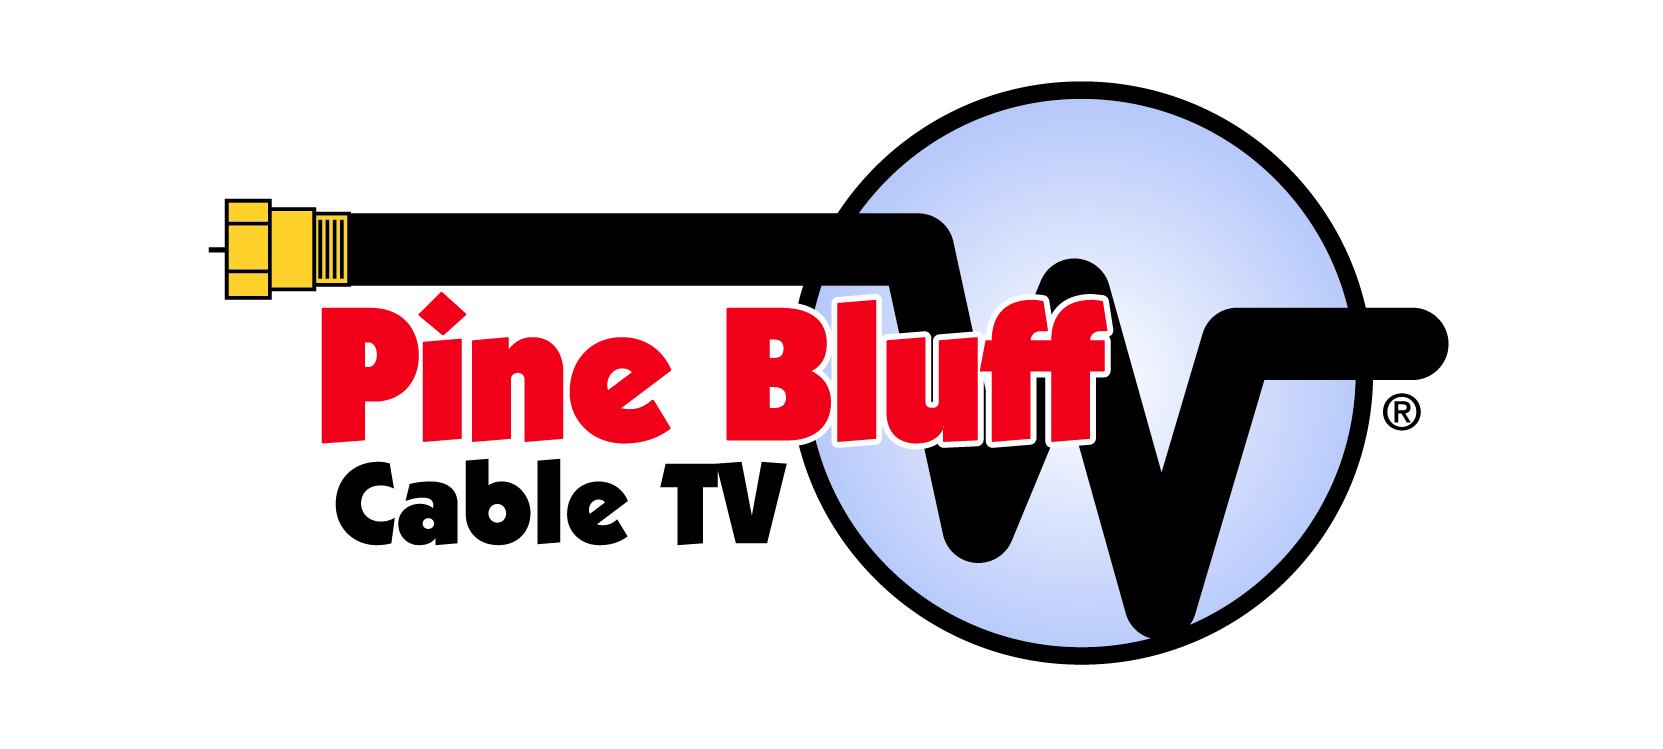 Pine Bluff Cable TV Logo